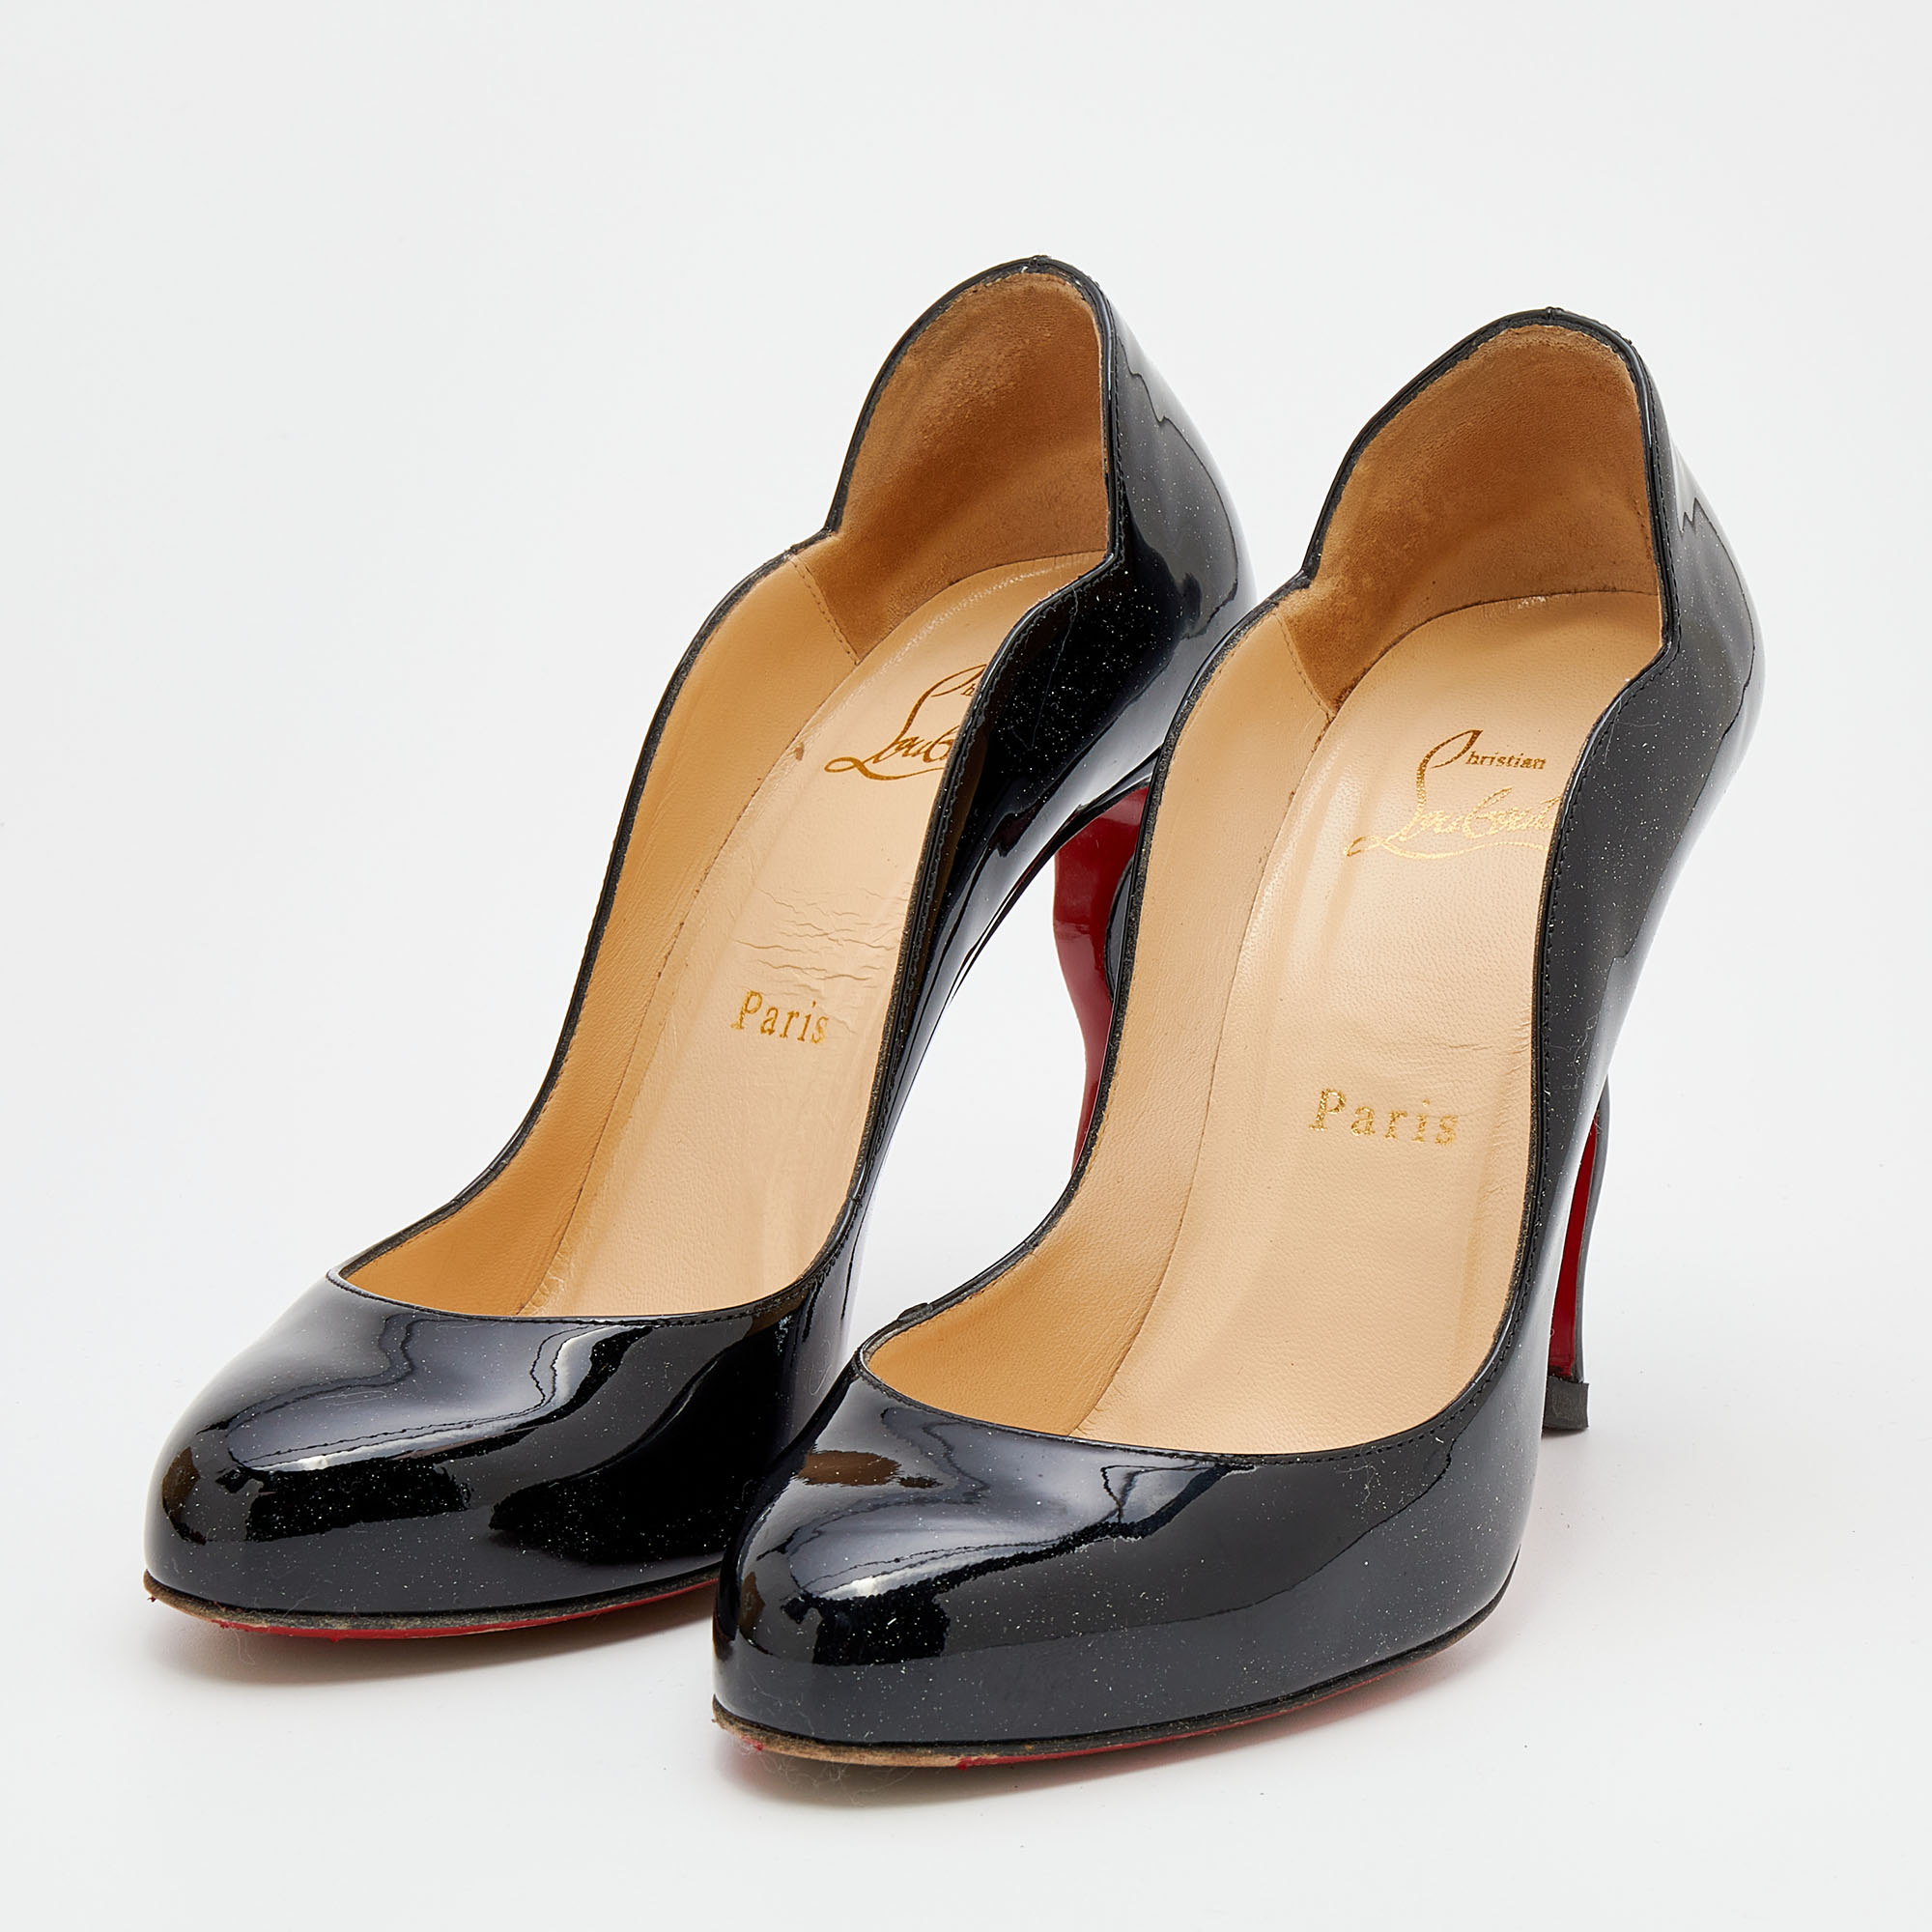 

Christian Louboutin Black Patent Leather Wavy Dolly Pumps Size